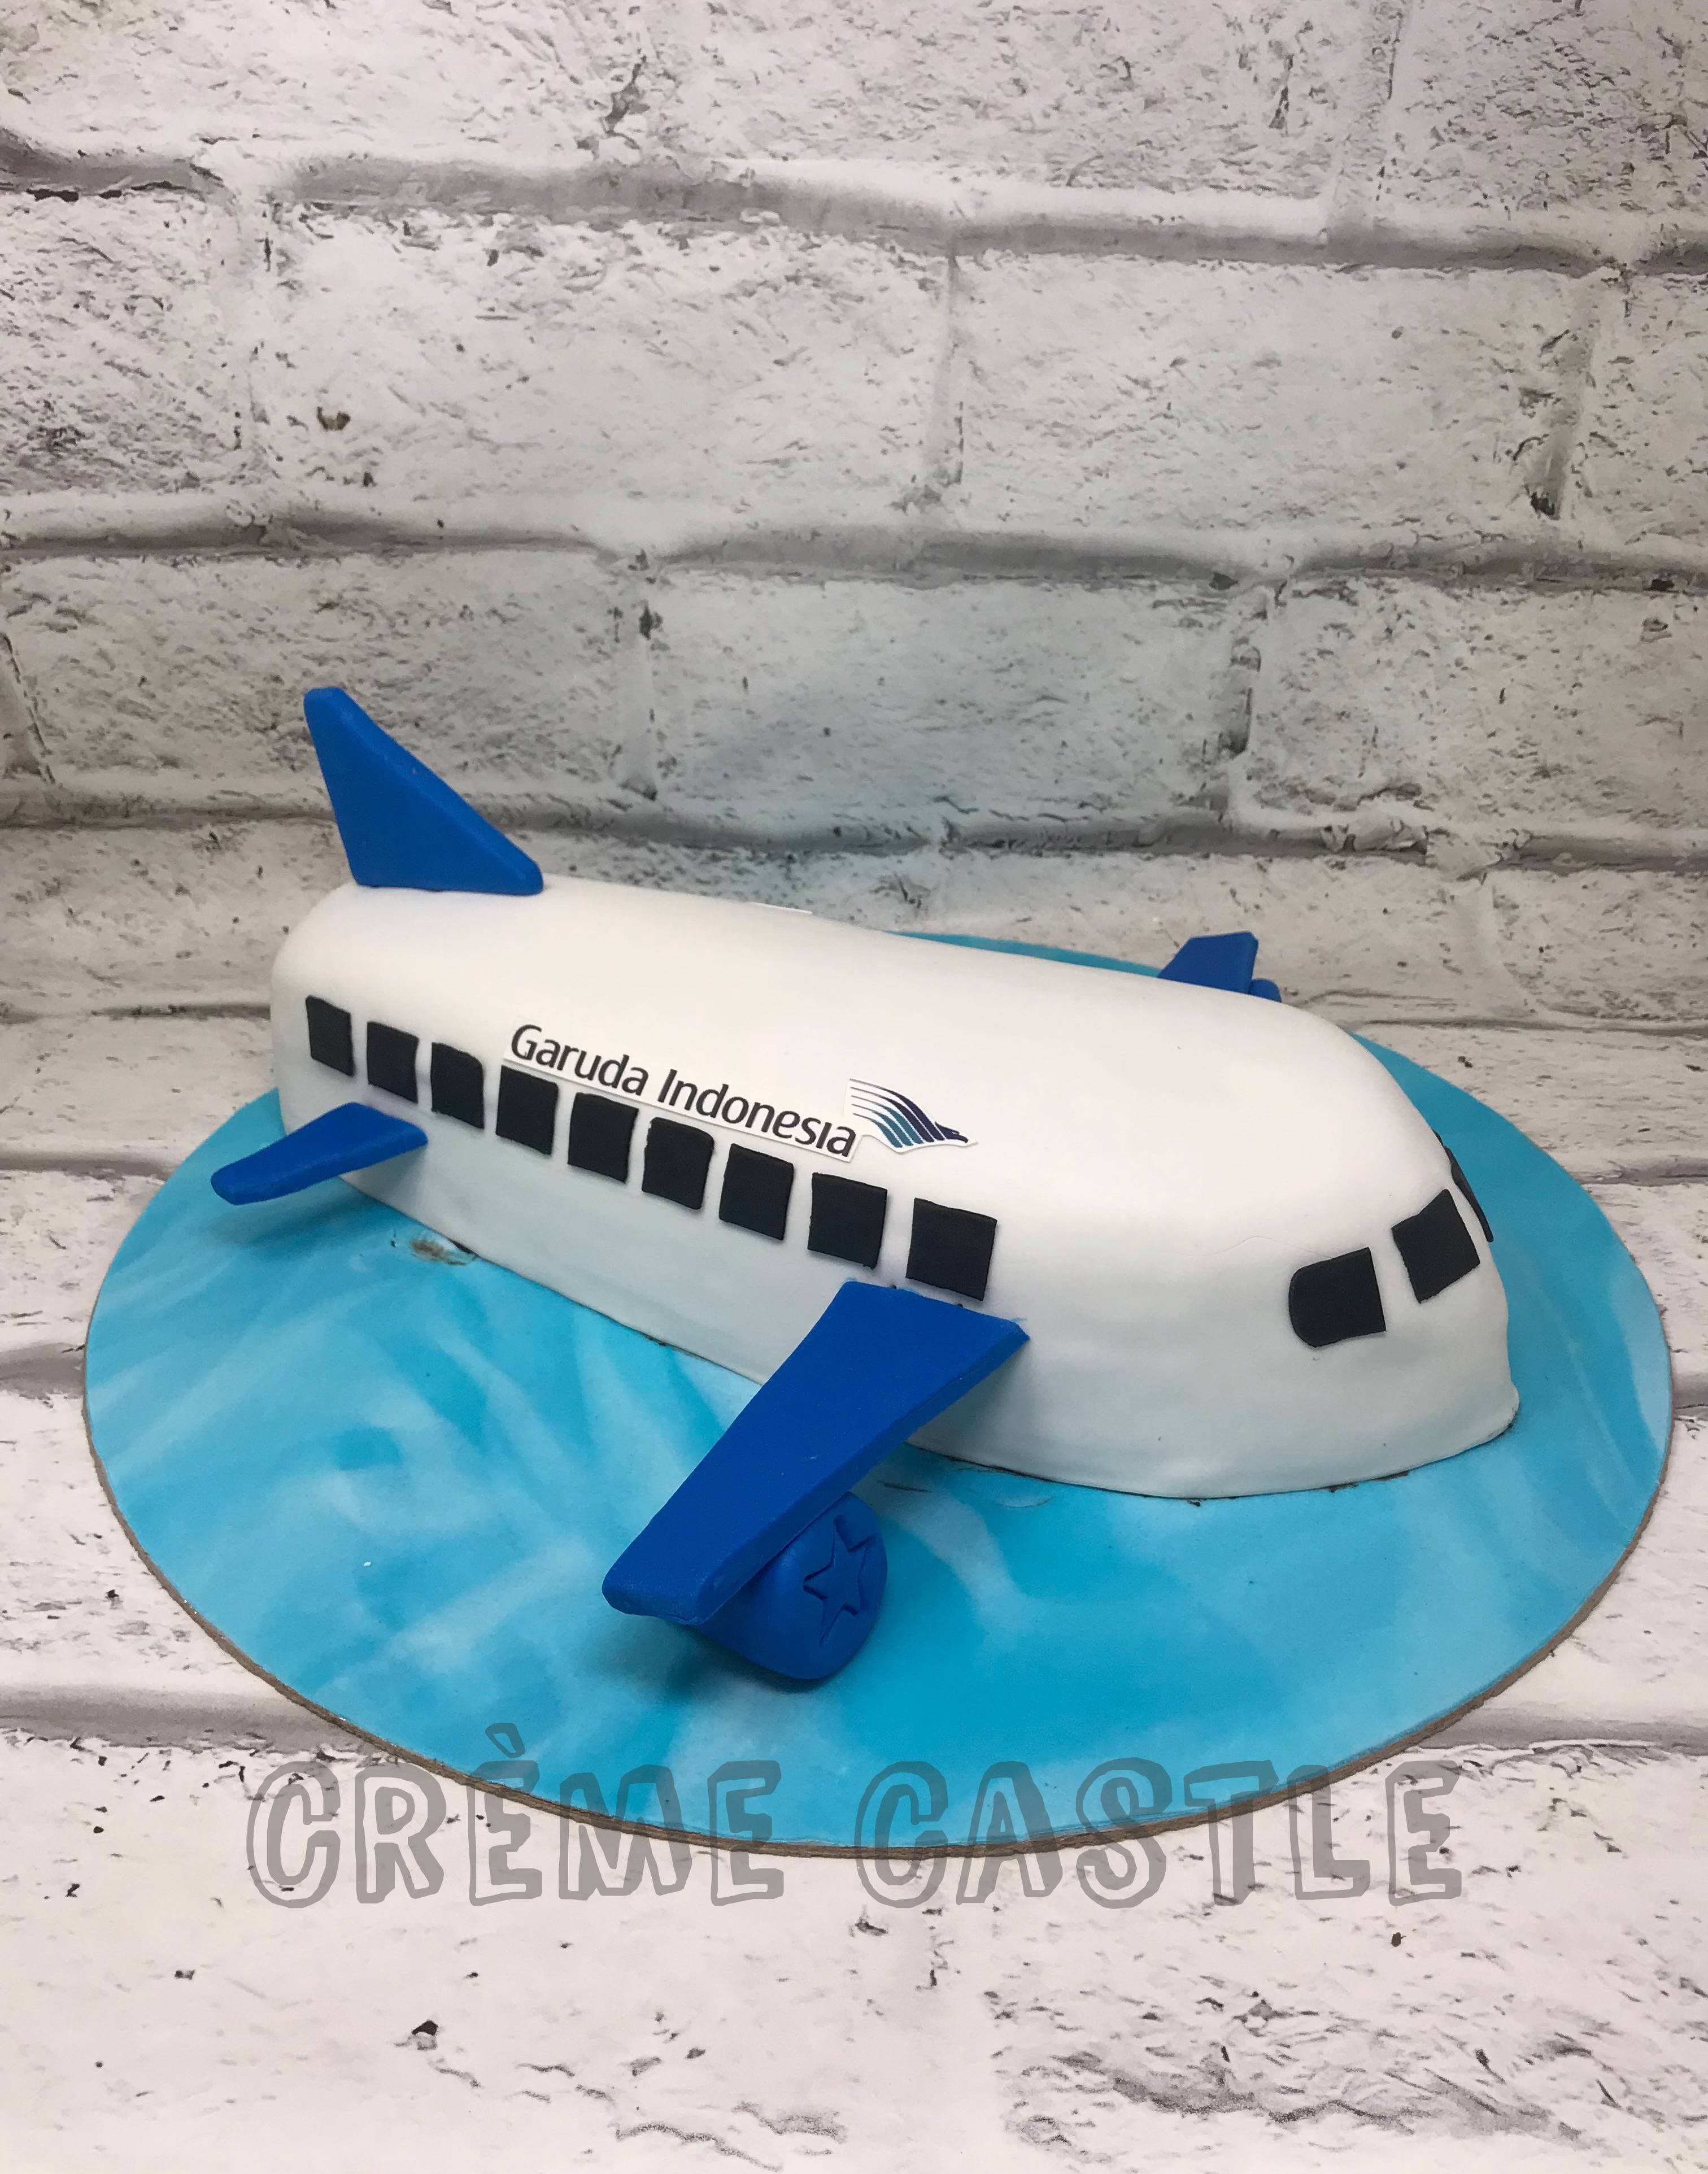 Adorable Animated Style Airplane Kid's Birthday Cake Decorating How To  Video Tutorial Part 2 - YouTube